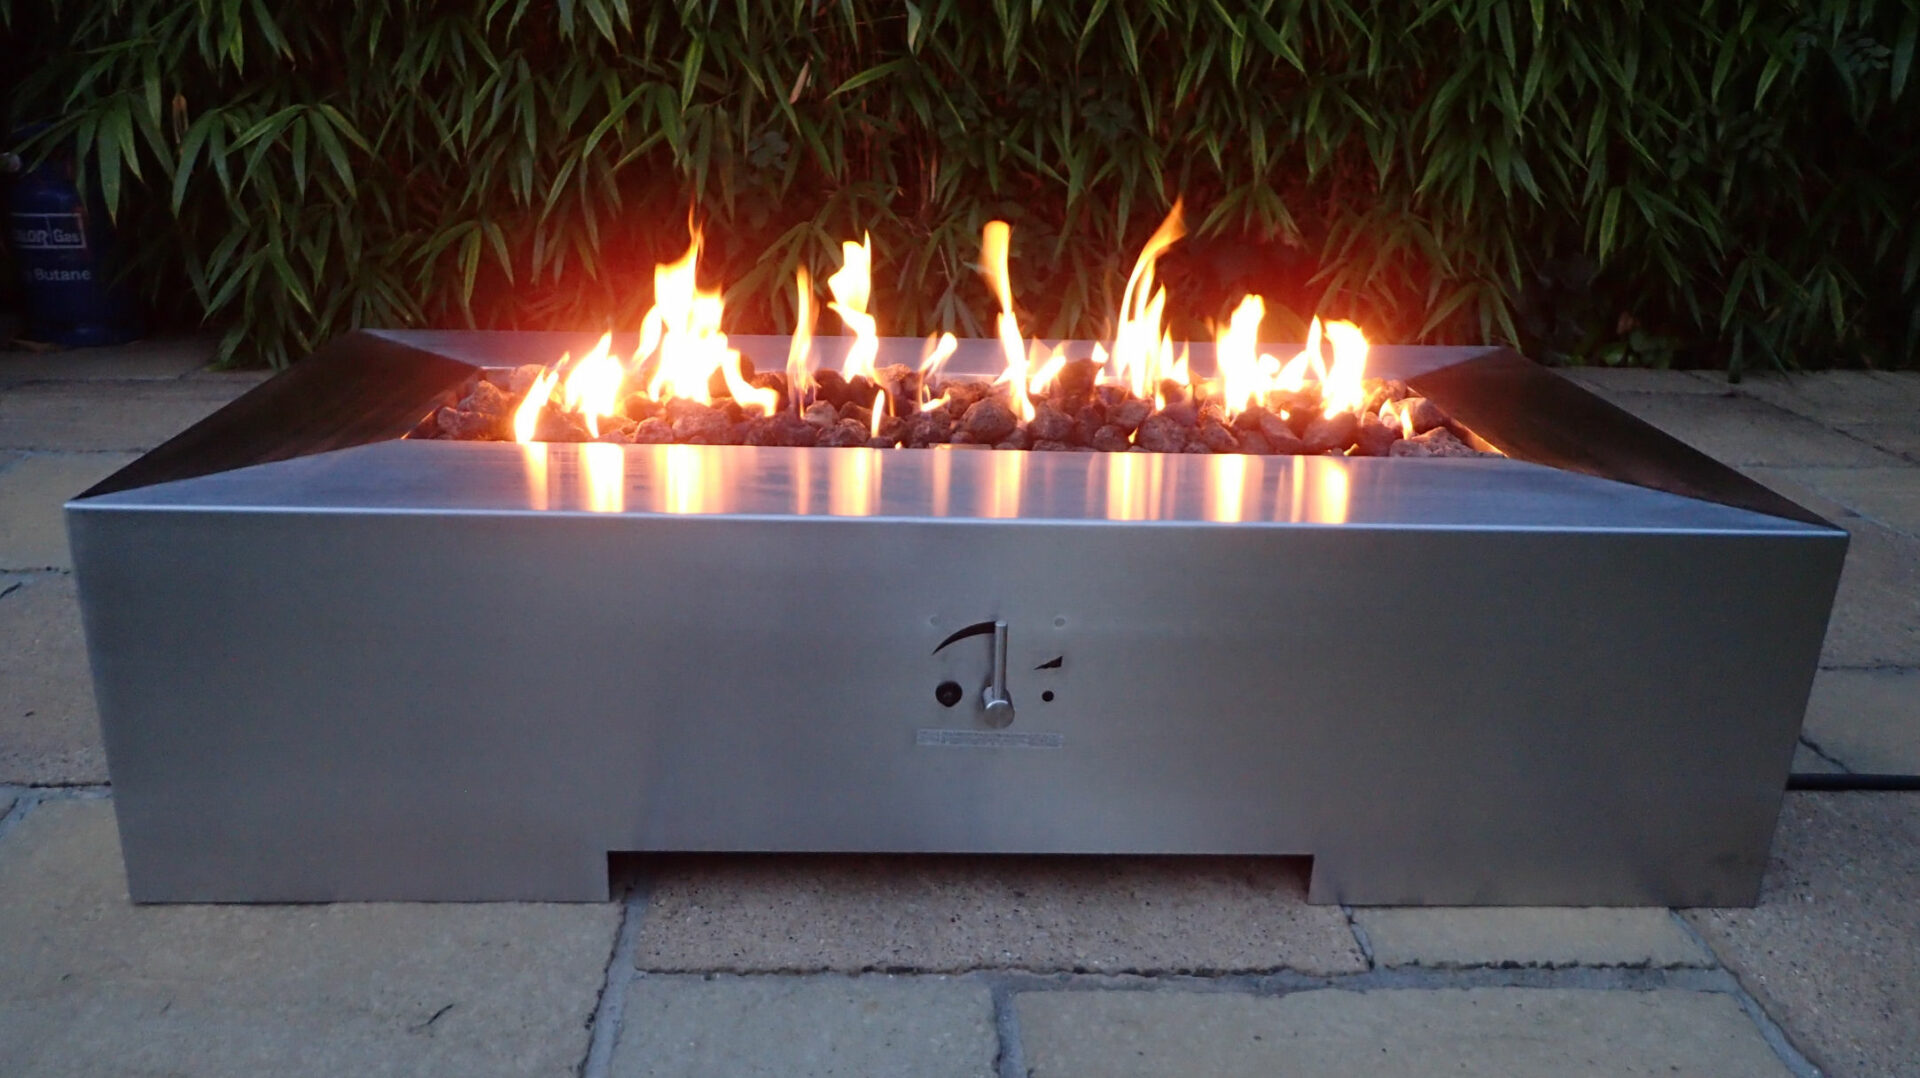 Orion Rectangle Gas Fire Pit Table, Fire Pits Uk